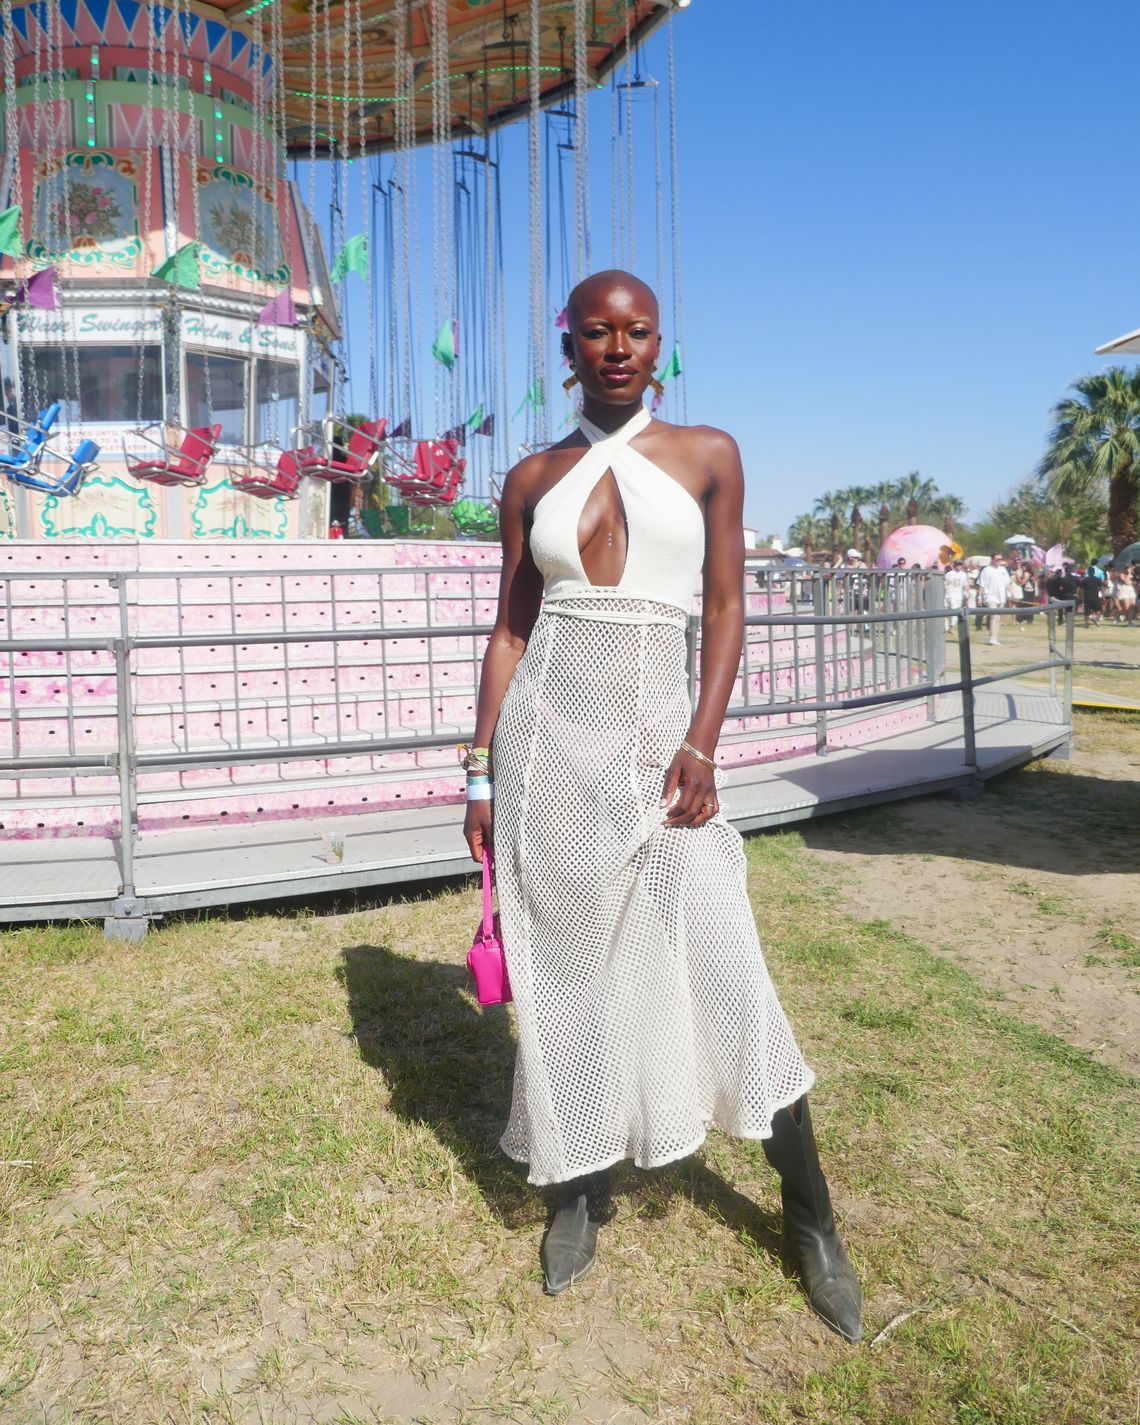 What I Learned About Fashion Trends at Coachella